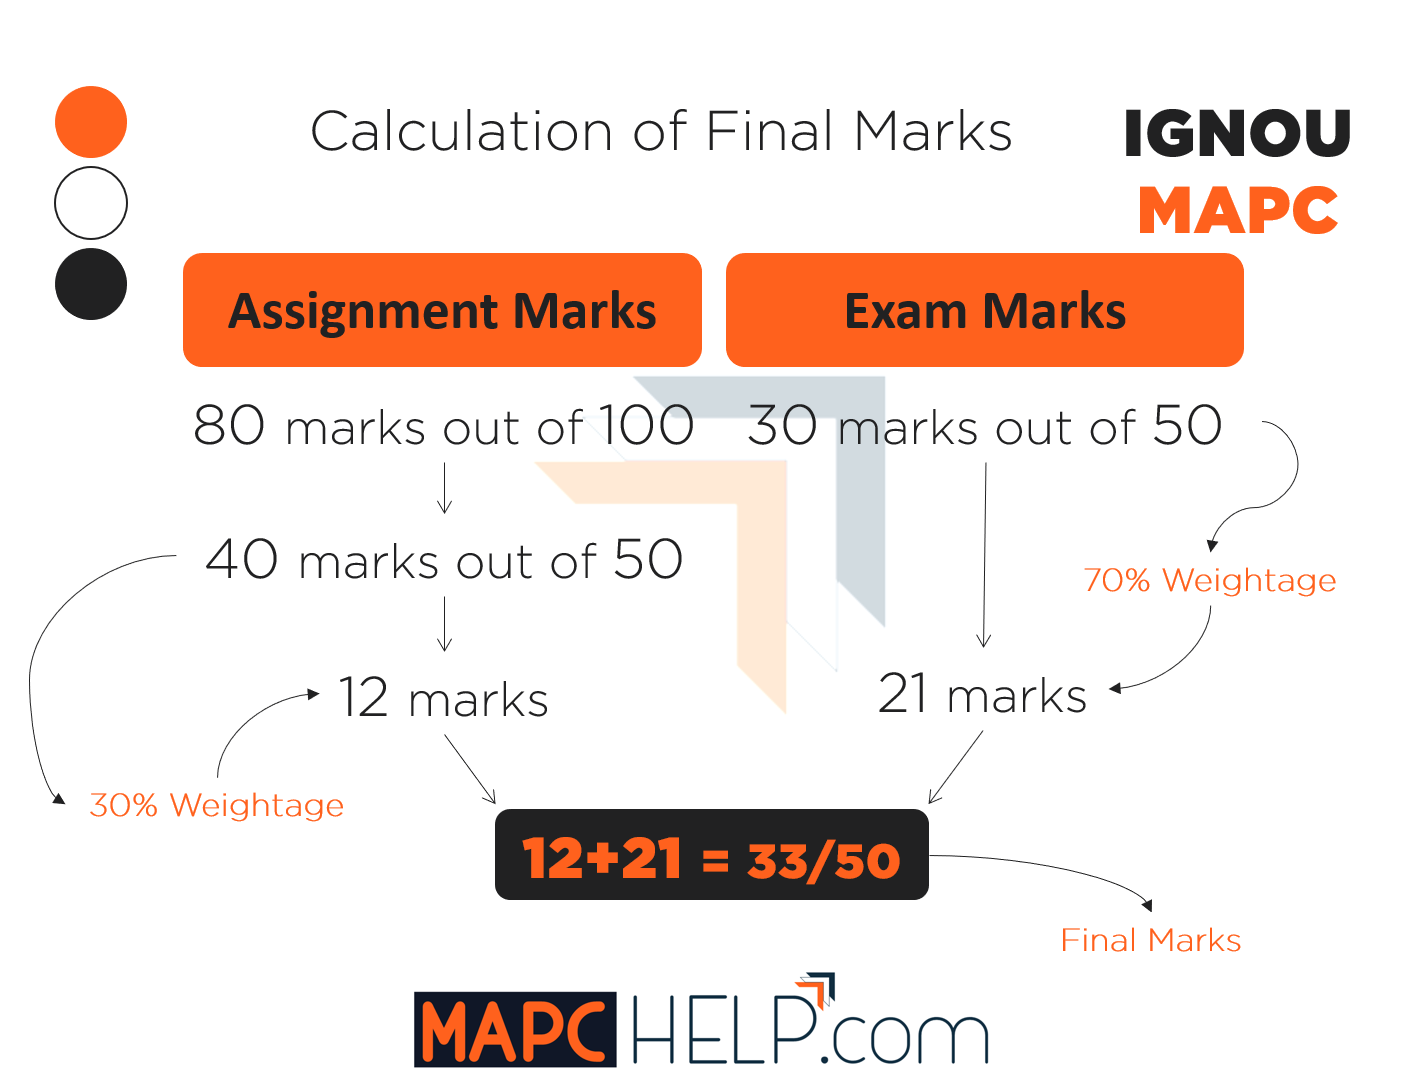 How Total Marks are Calculated?